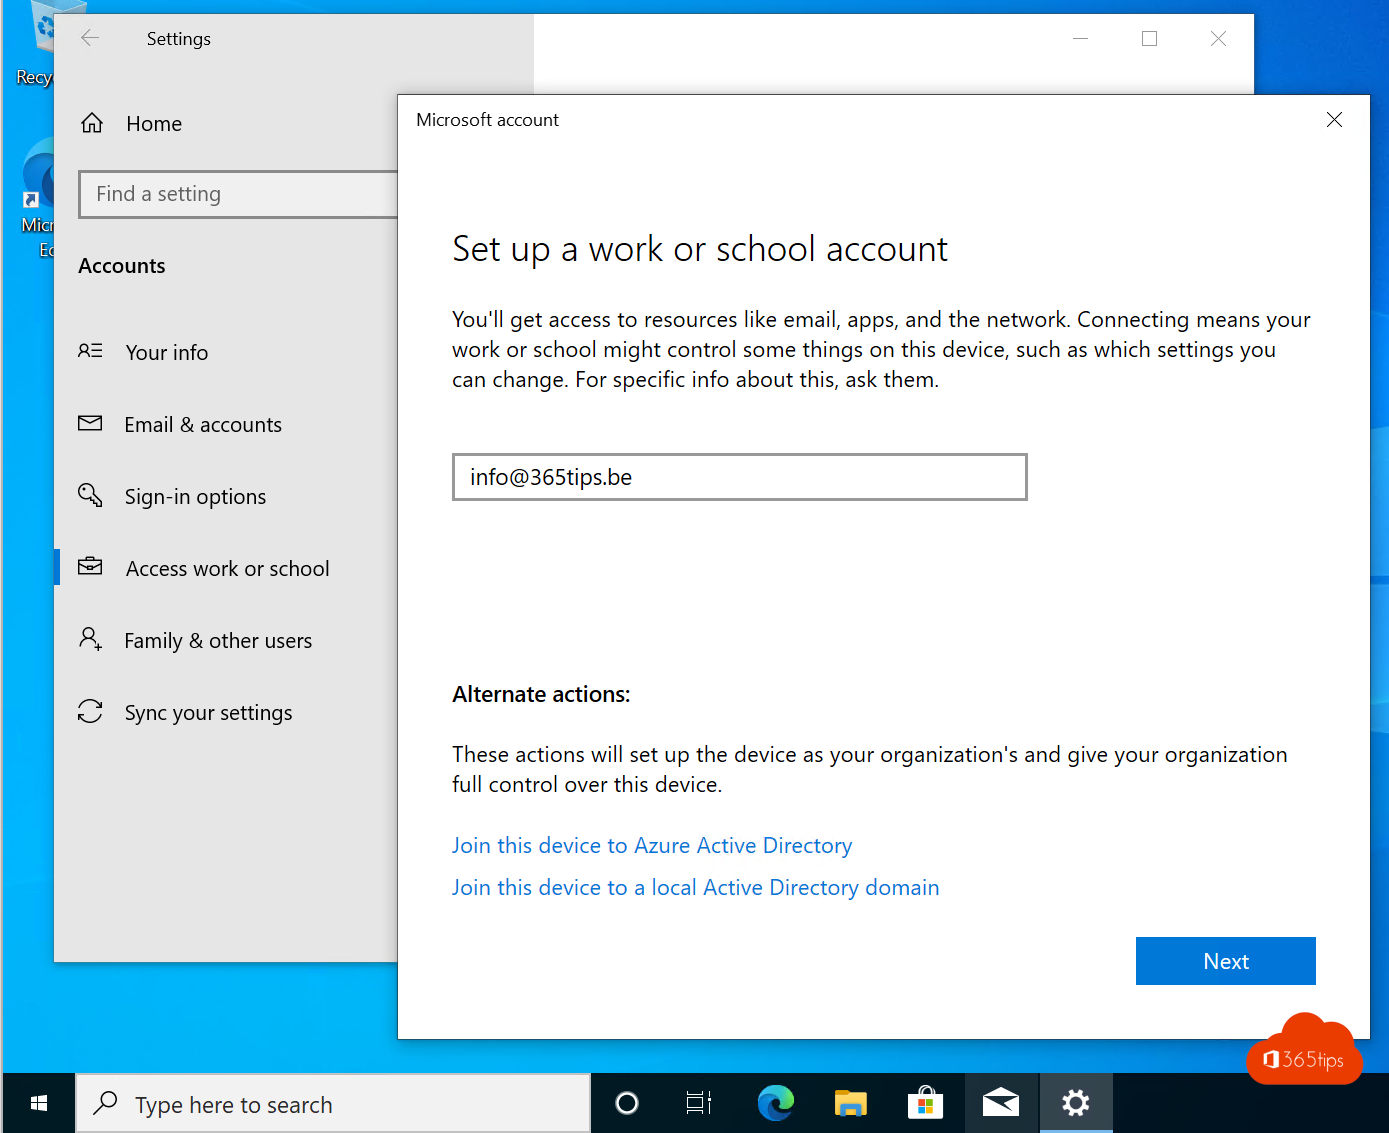 Add your Office 365 work account to your home computer in 5 easy steps